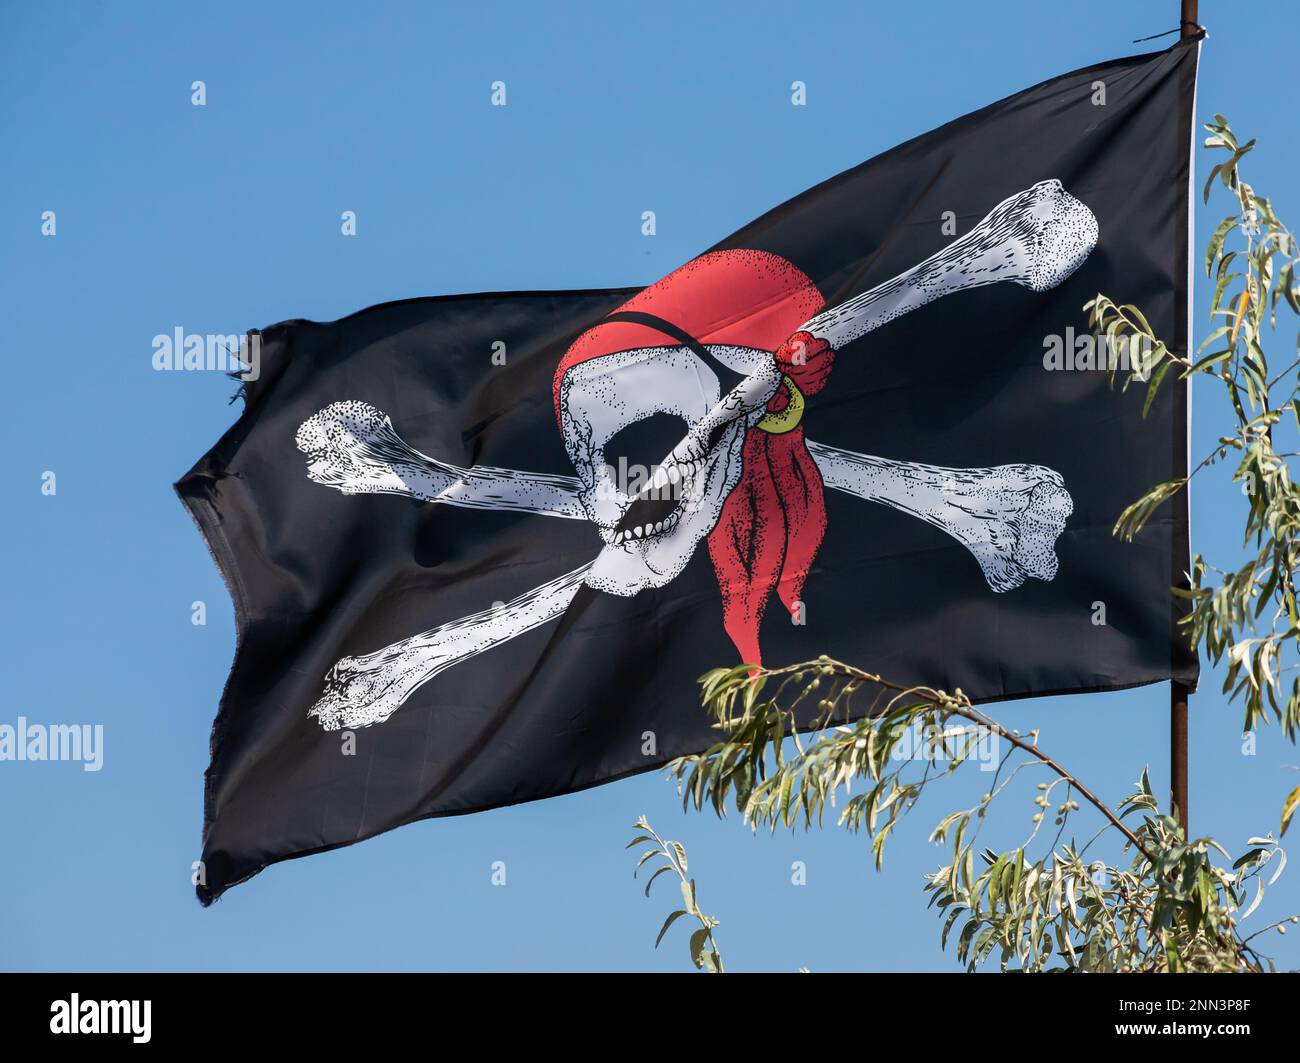 A skull and cross bones pirate flag waving in the wind. Stock Photo